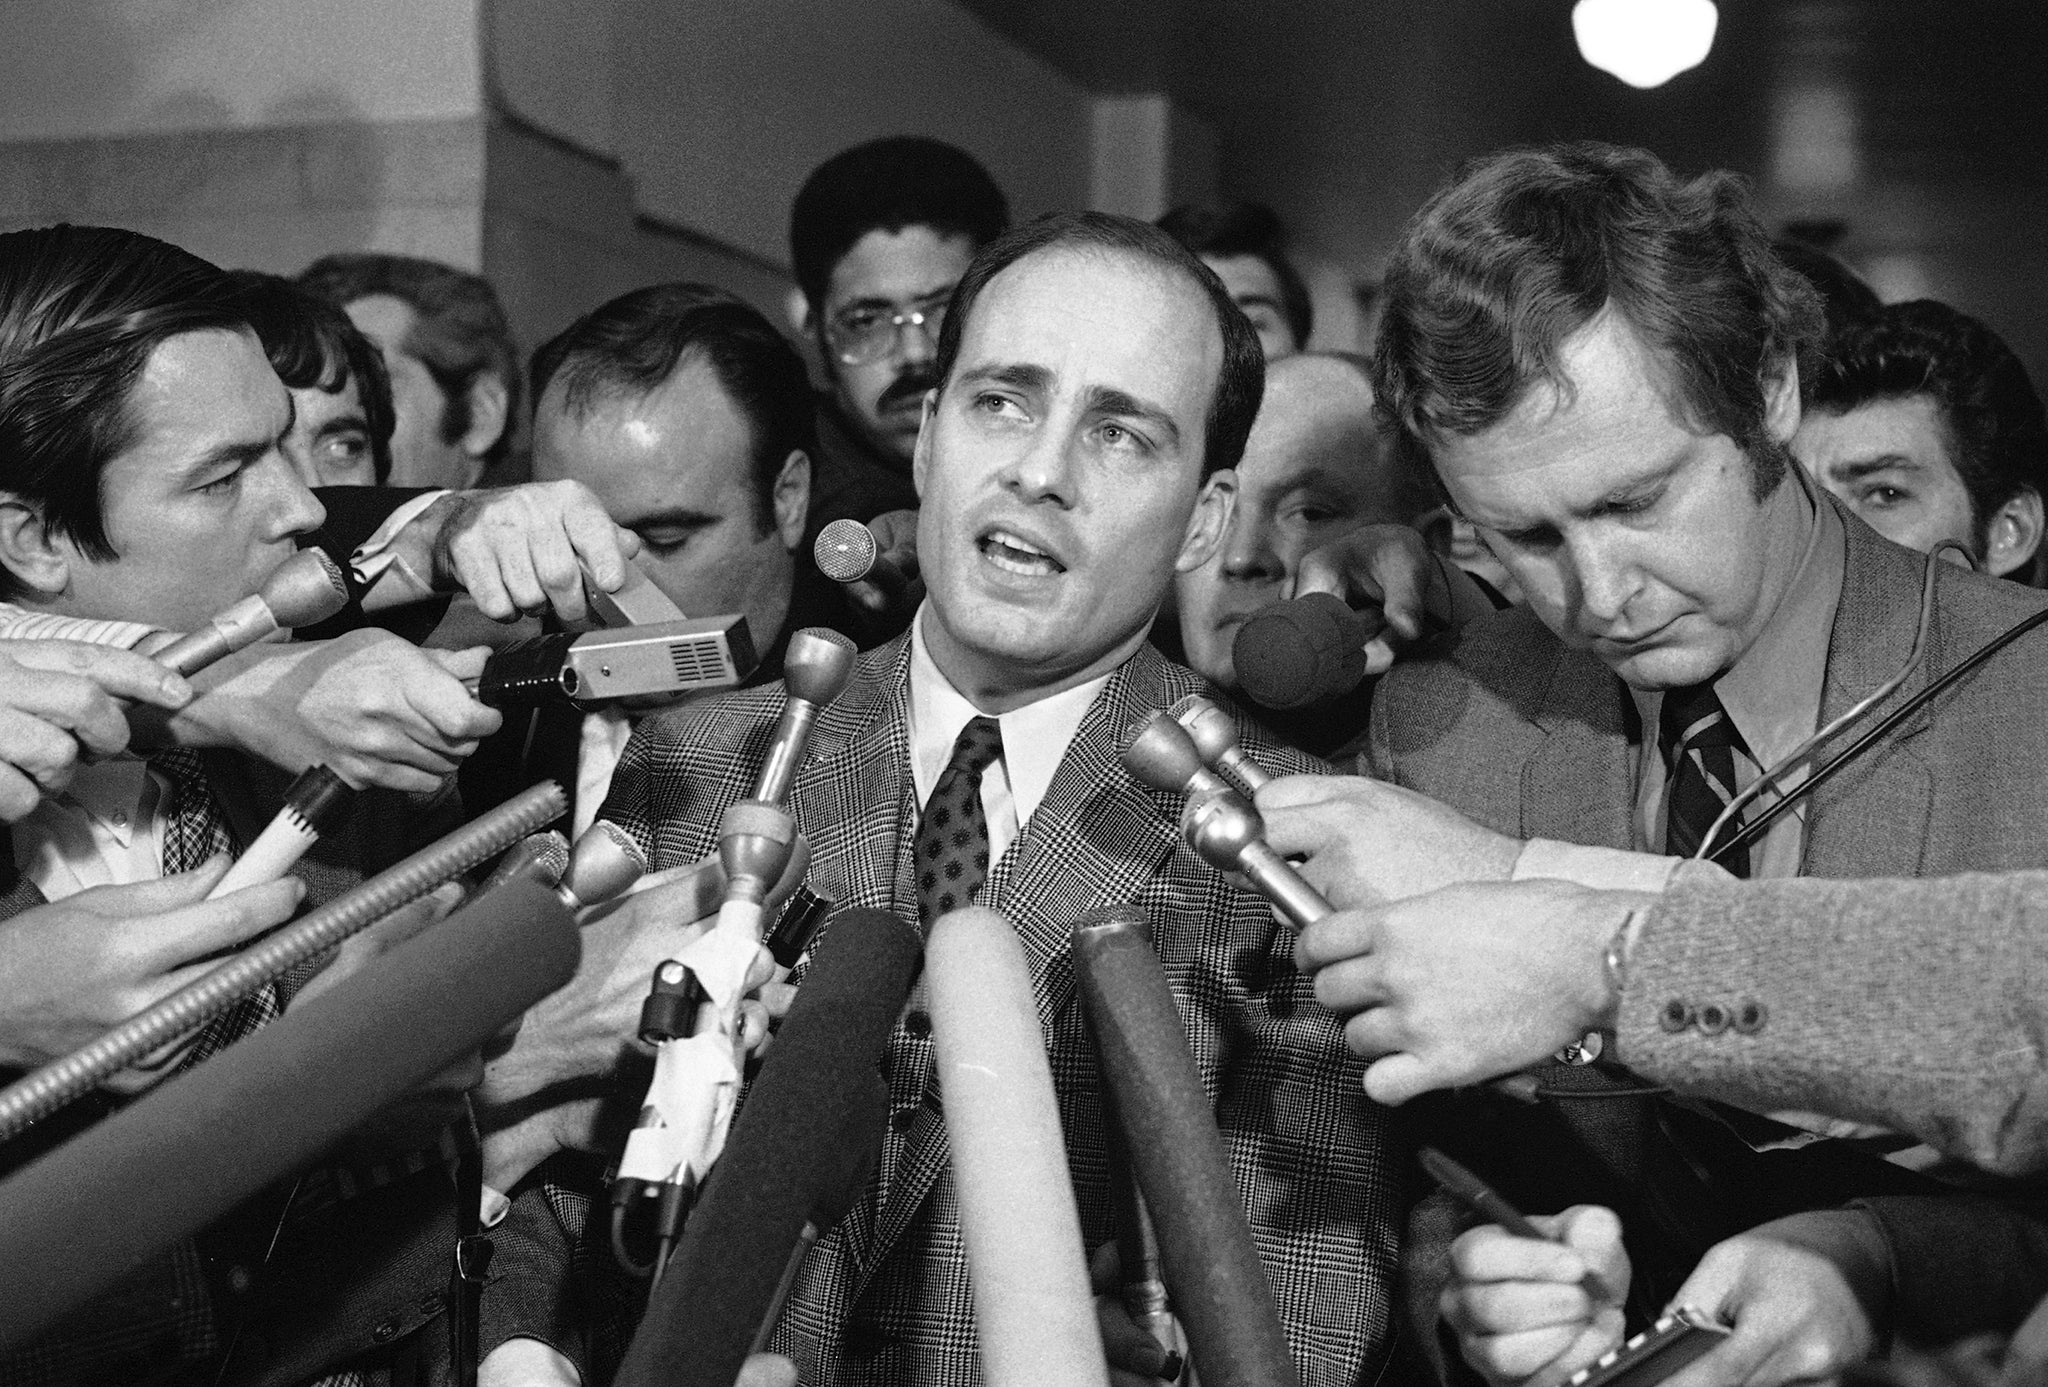 No one trusted Vincent Bugliosi, chief prosecutor at the Manson trial